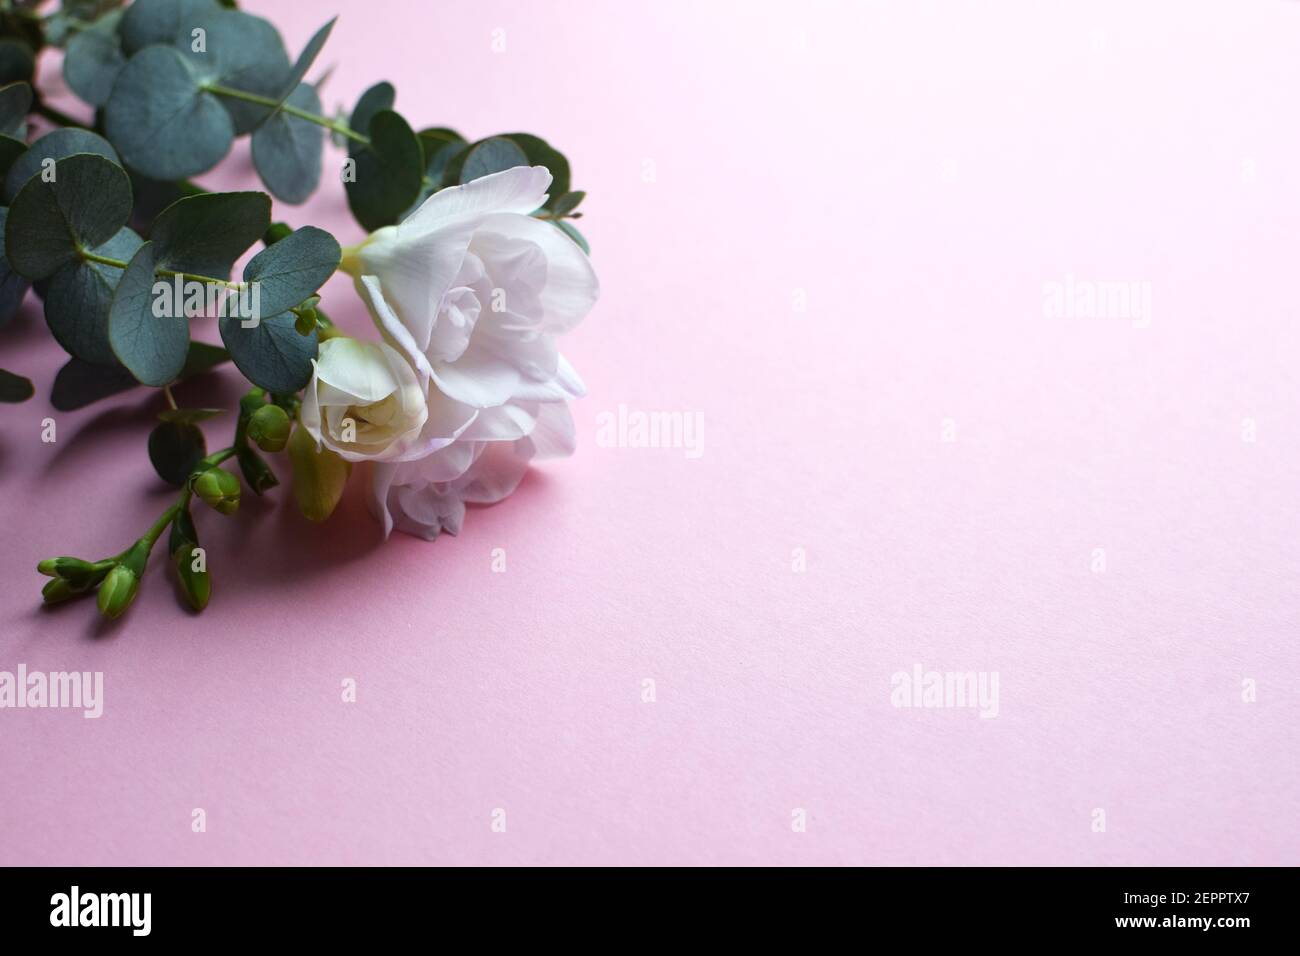 Floral background. Beautiful freesia flower and eucalyptus branches on a pink background.  Place for text. Stock Photo